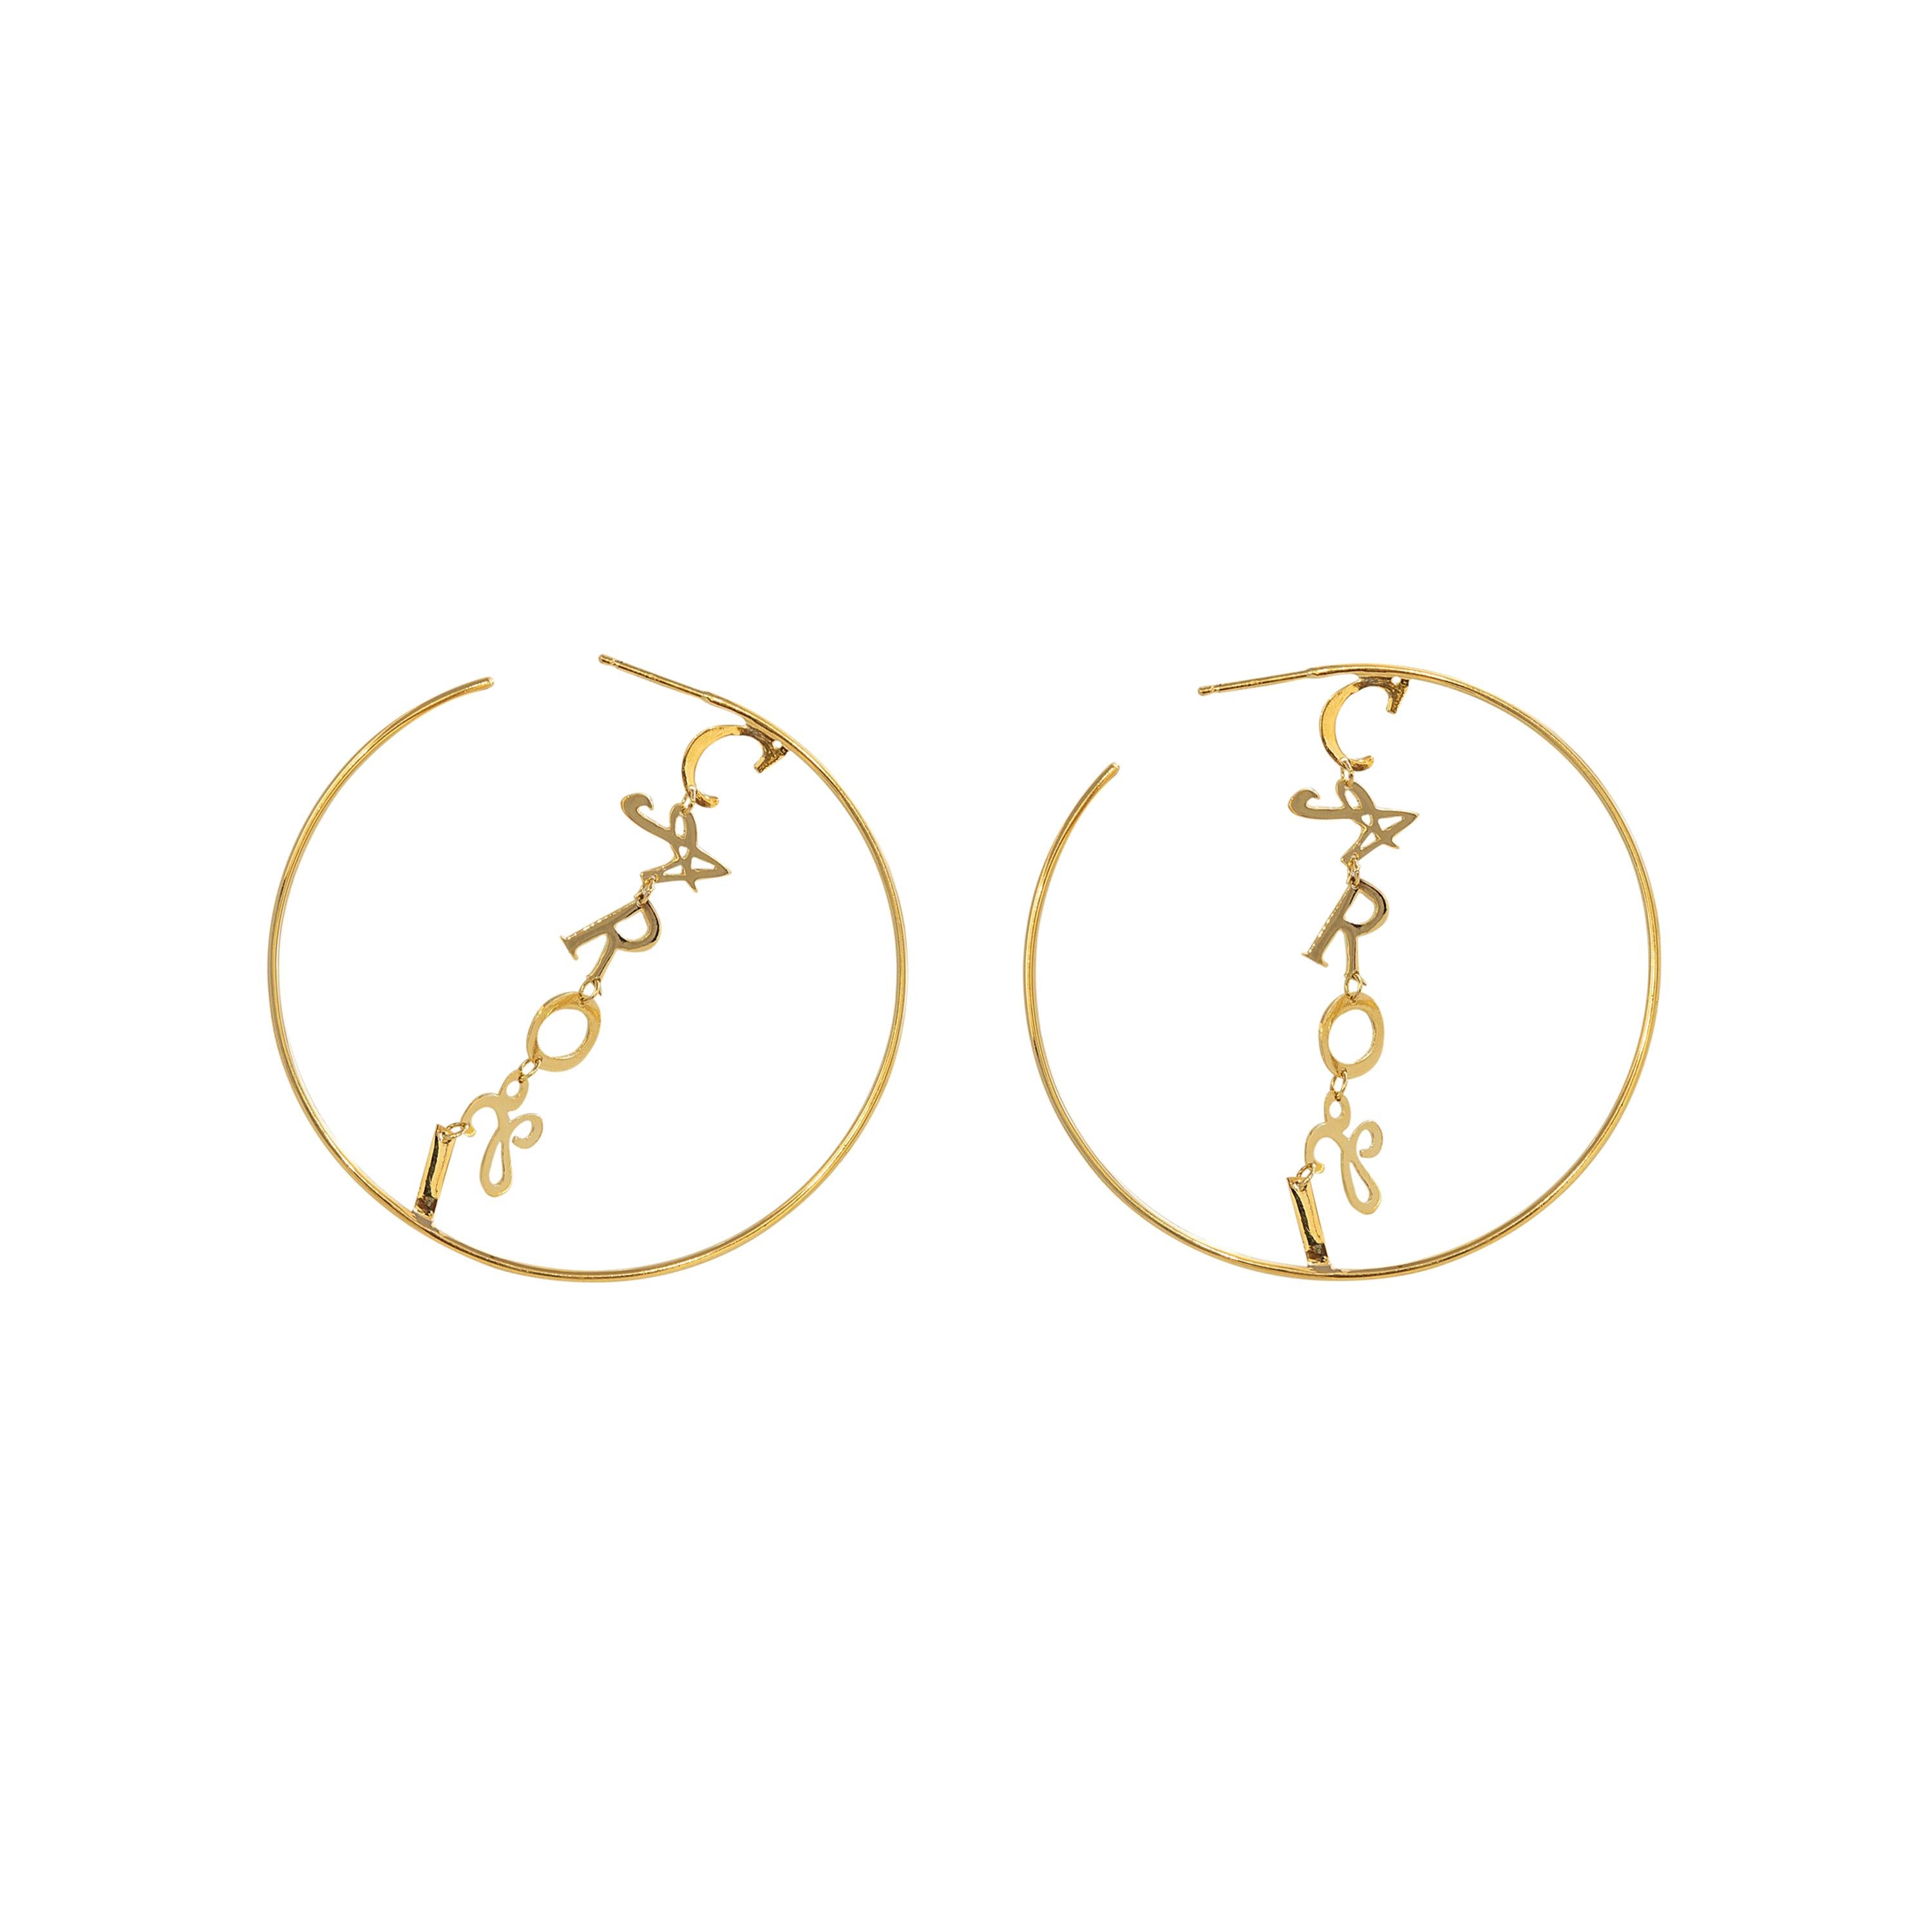 Modern Personalize 18K Yellow Gold Bespoke Hoops Contemporary Letter Design Earrings For Sale